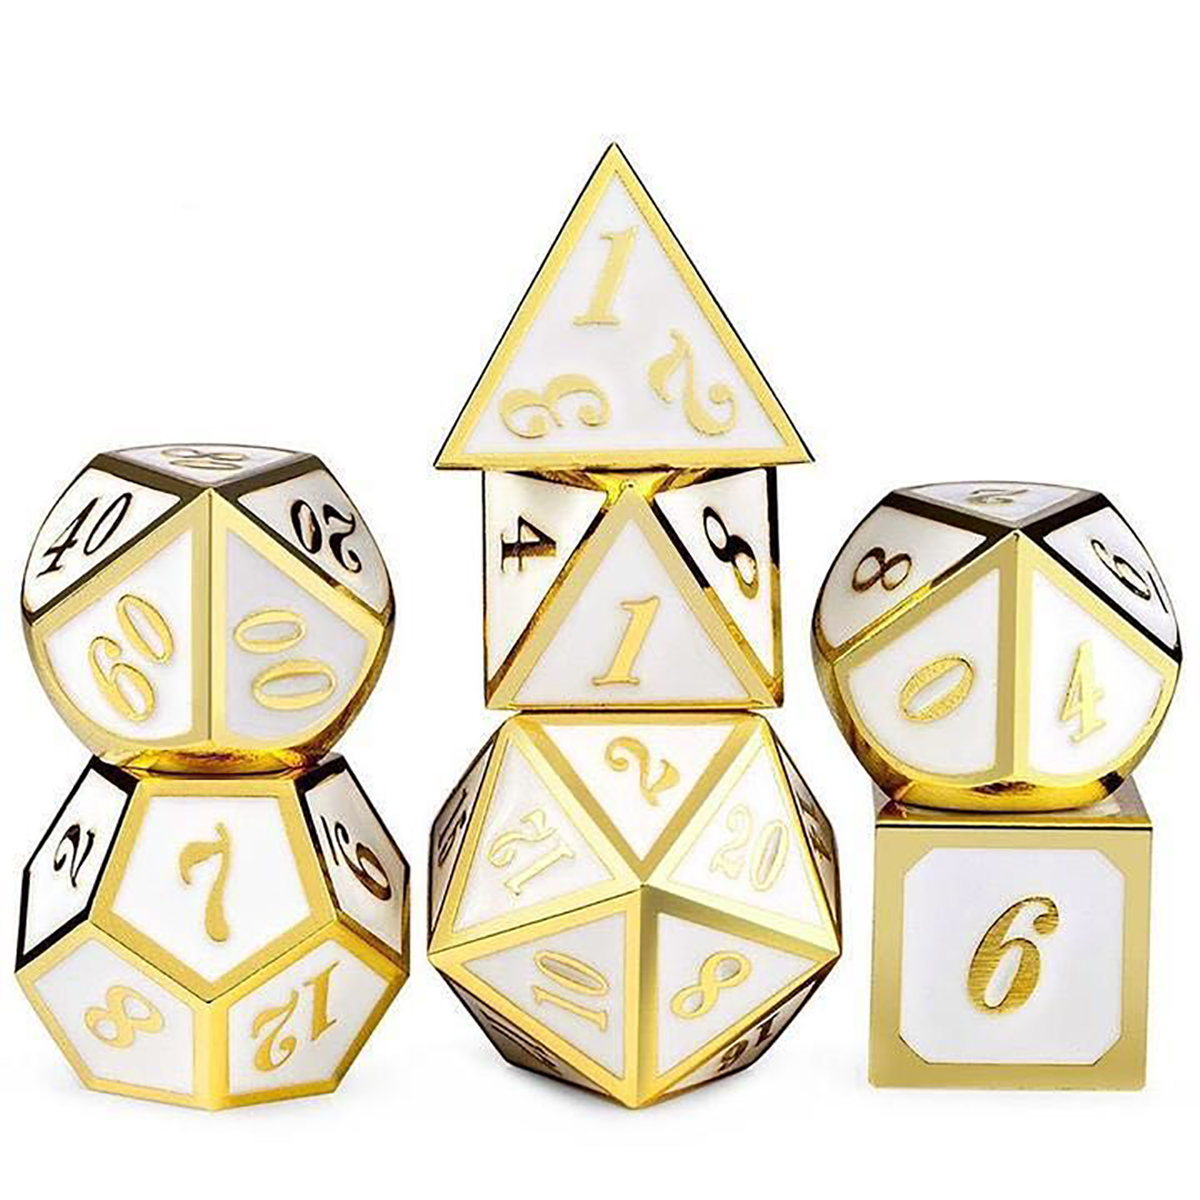 7-PcsSet-Metal-Dice-Set-Role-Playing-Dragons-Table-Board-Game-Toys-With-Cloth-Bag-Bar-Party-Game-Dic-1672532-9